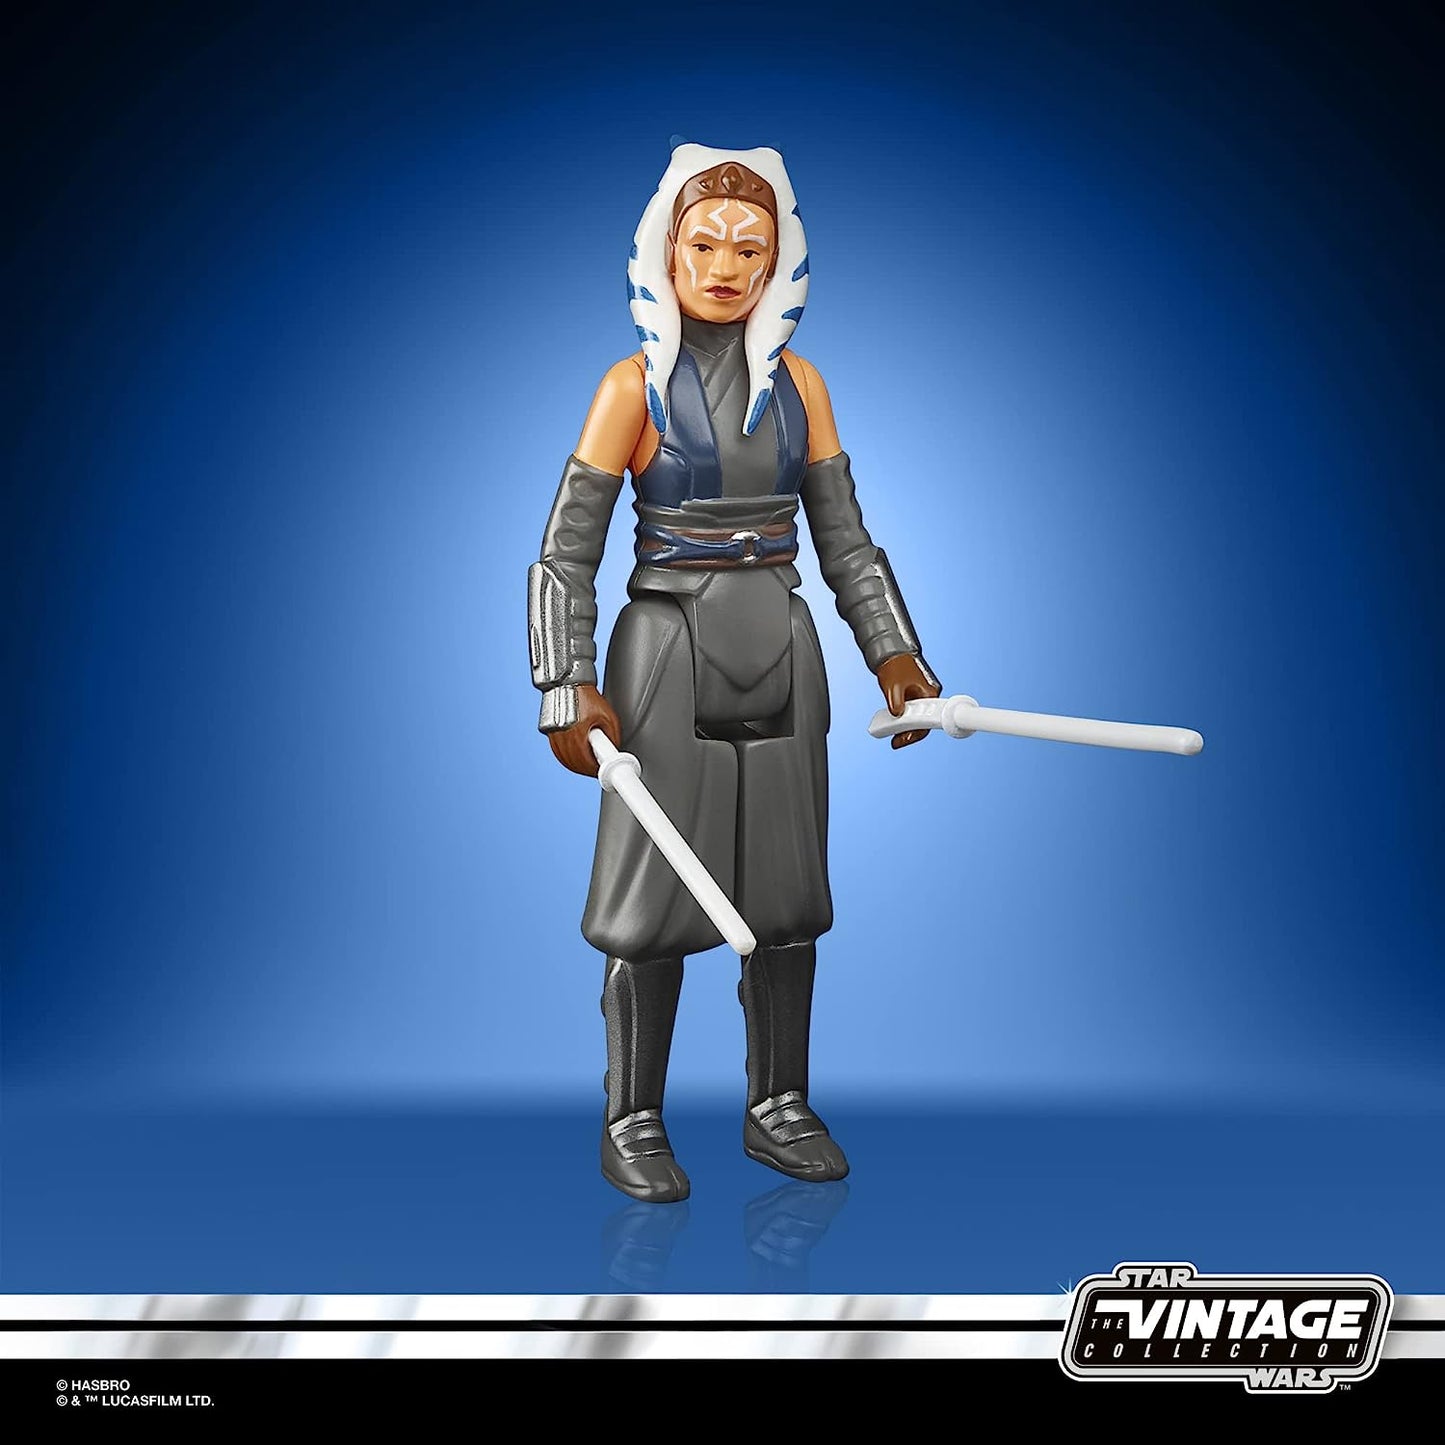 STAR WARS Retro Collection Ahsoka Tano Toy 3.75-Inch-Scale The Mandalorian Collectible Action Figure